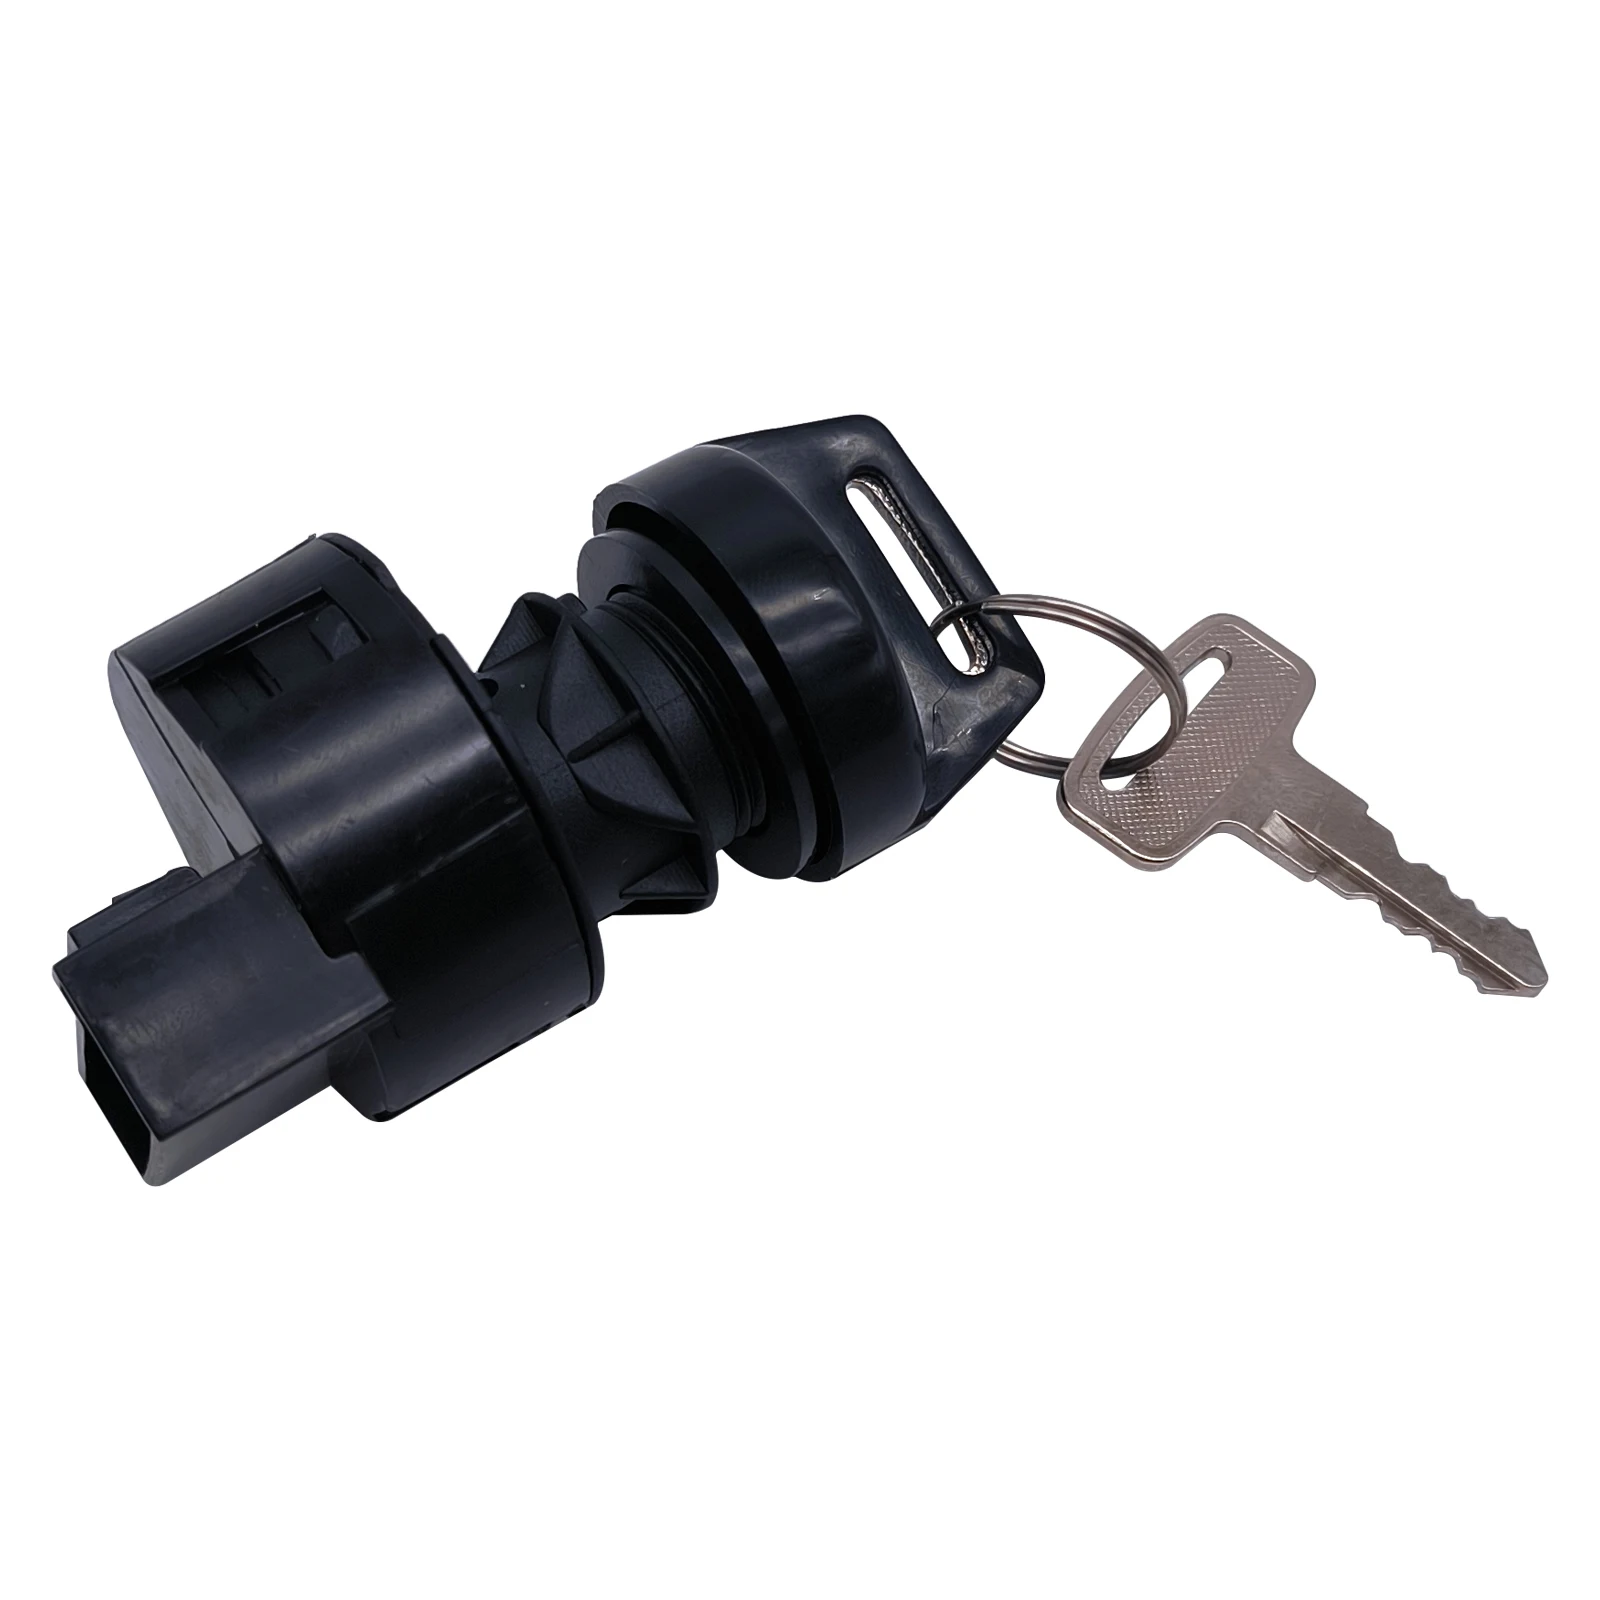 Motorcycle Ignition Switch Lock Keys Set Fit For Polaris RZR 570 800 900 1000 part number is 4011002 4012165 20pc keys part 2498 for bomag for isuzu for kobelco for machines heavy equipment